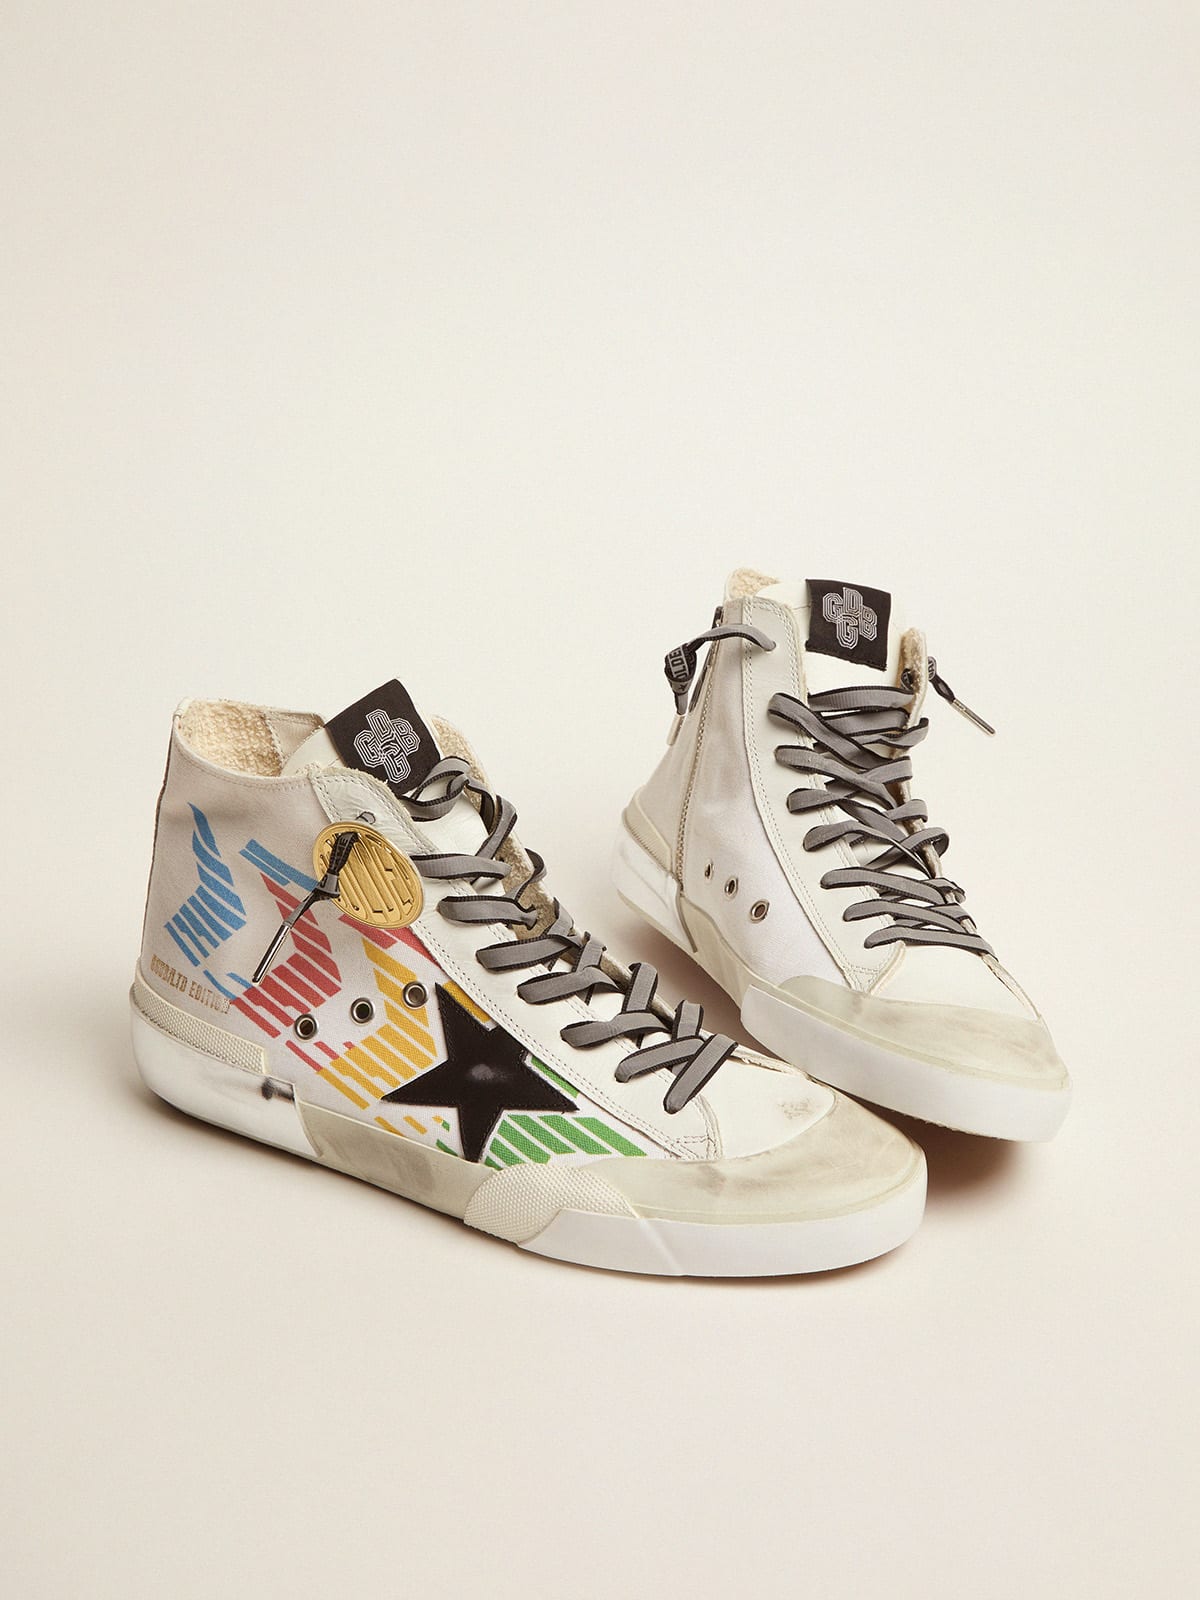 Golden Goose - Women’s Francy sneakers with white canvas upper and multicolored screen print in 